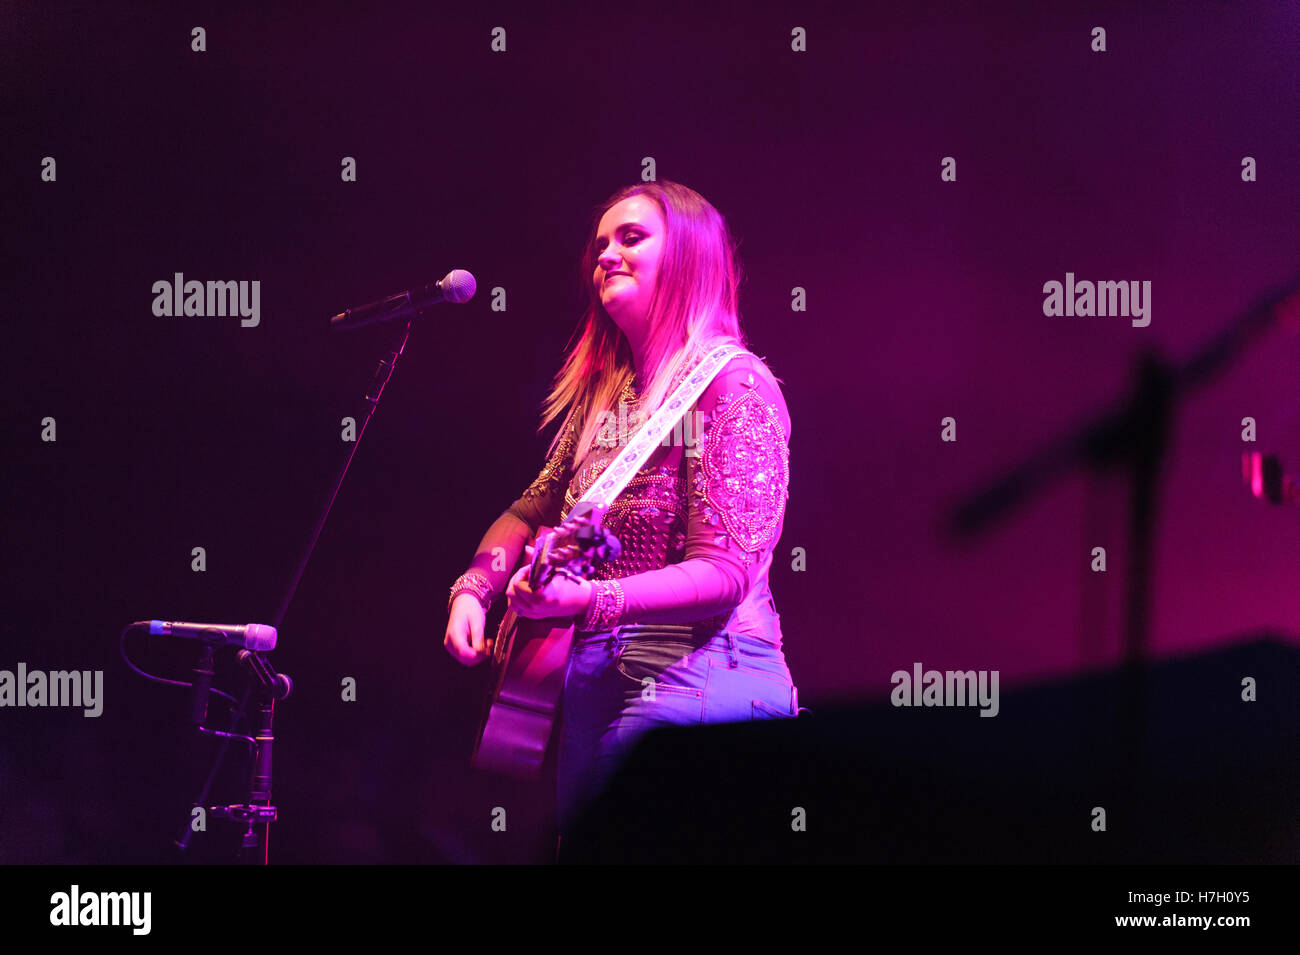 Liverpool, UK. 4th November 2016. Singer, Chelsea Alice Scott, performs as support for Rebecca Ferguson during her UK 'Superwoman' tour, at the Liverpool Philharmonic Hall © Paul Warburton Stock Photo